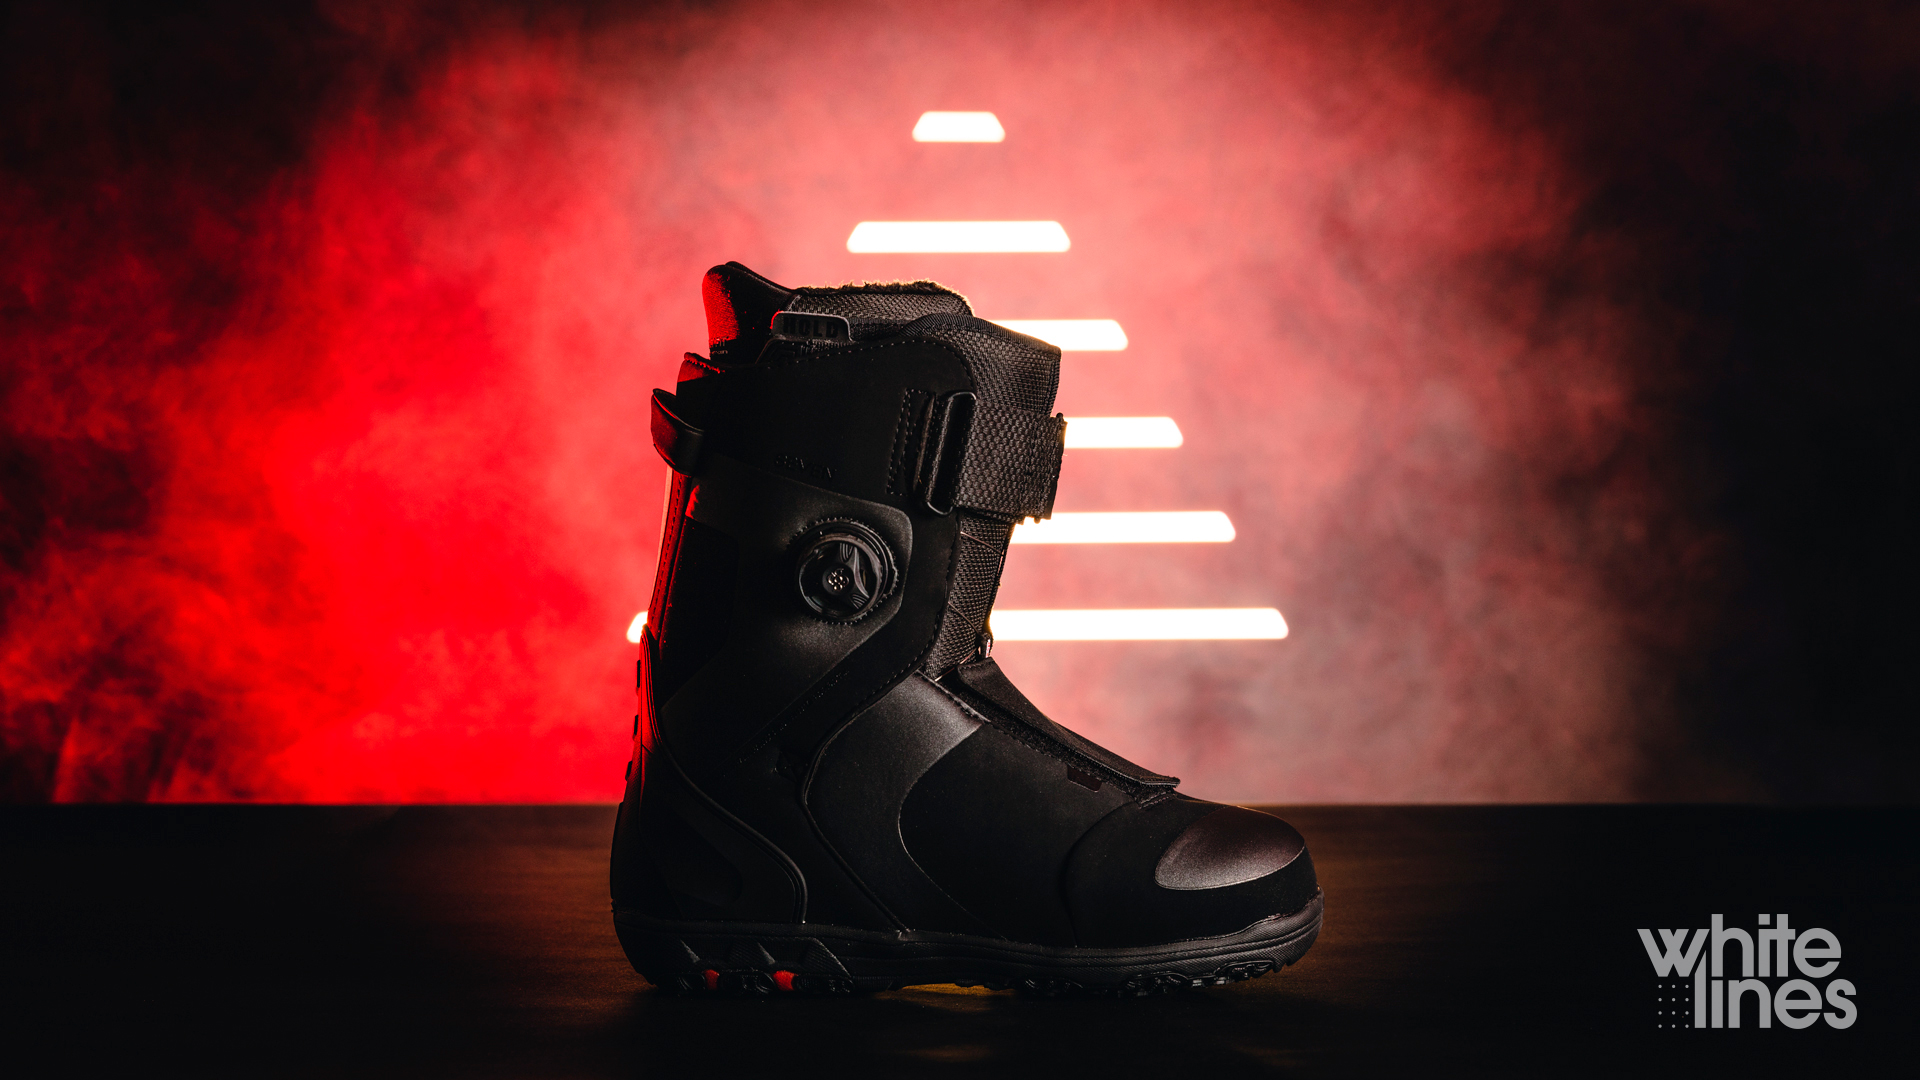 Head Seven Boa 2018-2019 Snowboard Boots Review - Wh